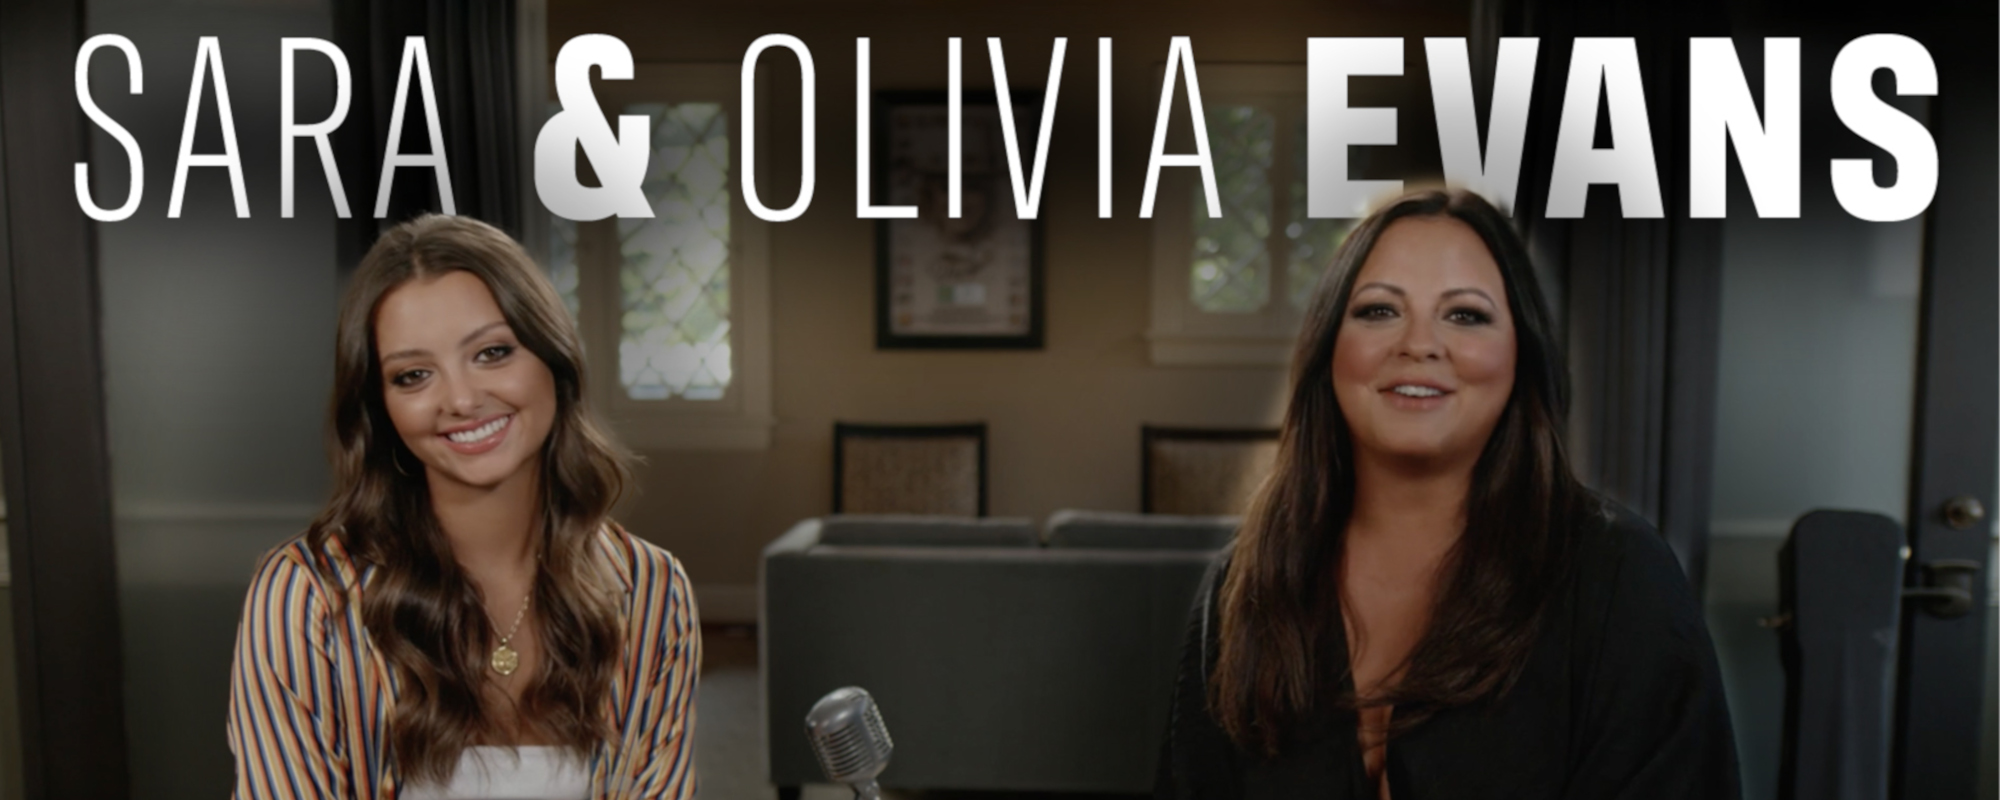 WATCH: Olivia Evans Has An Intimate Chat With Her Mom, Sara Evans, About Heartbreak, Songwriting, and More